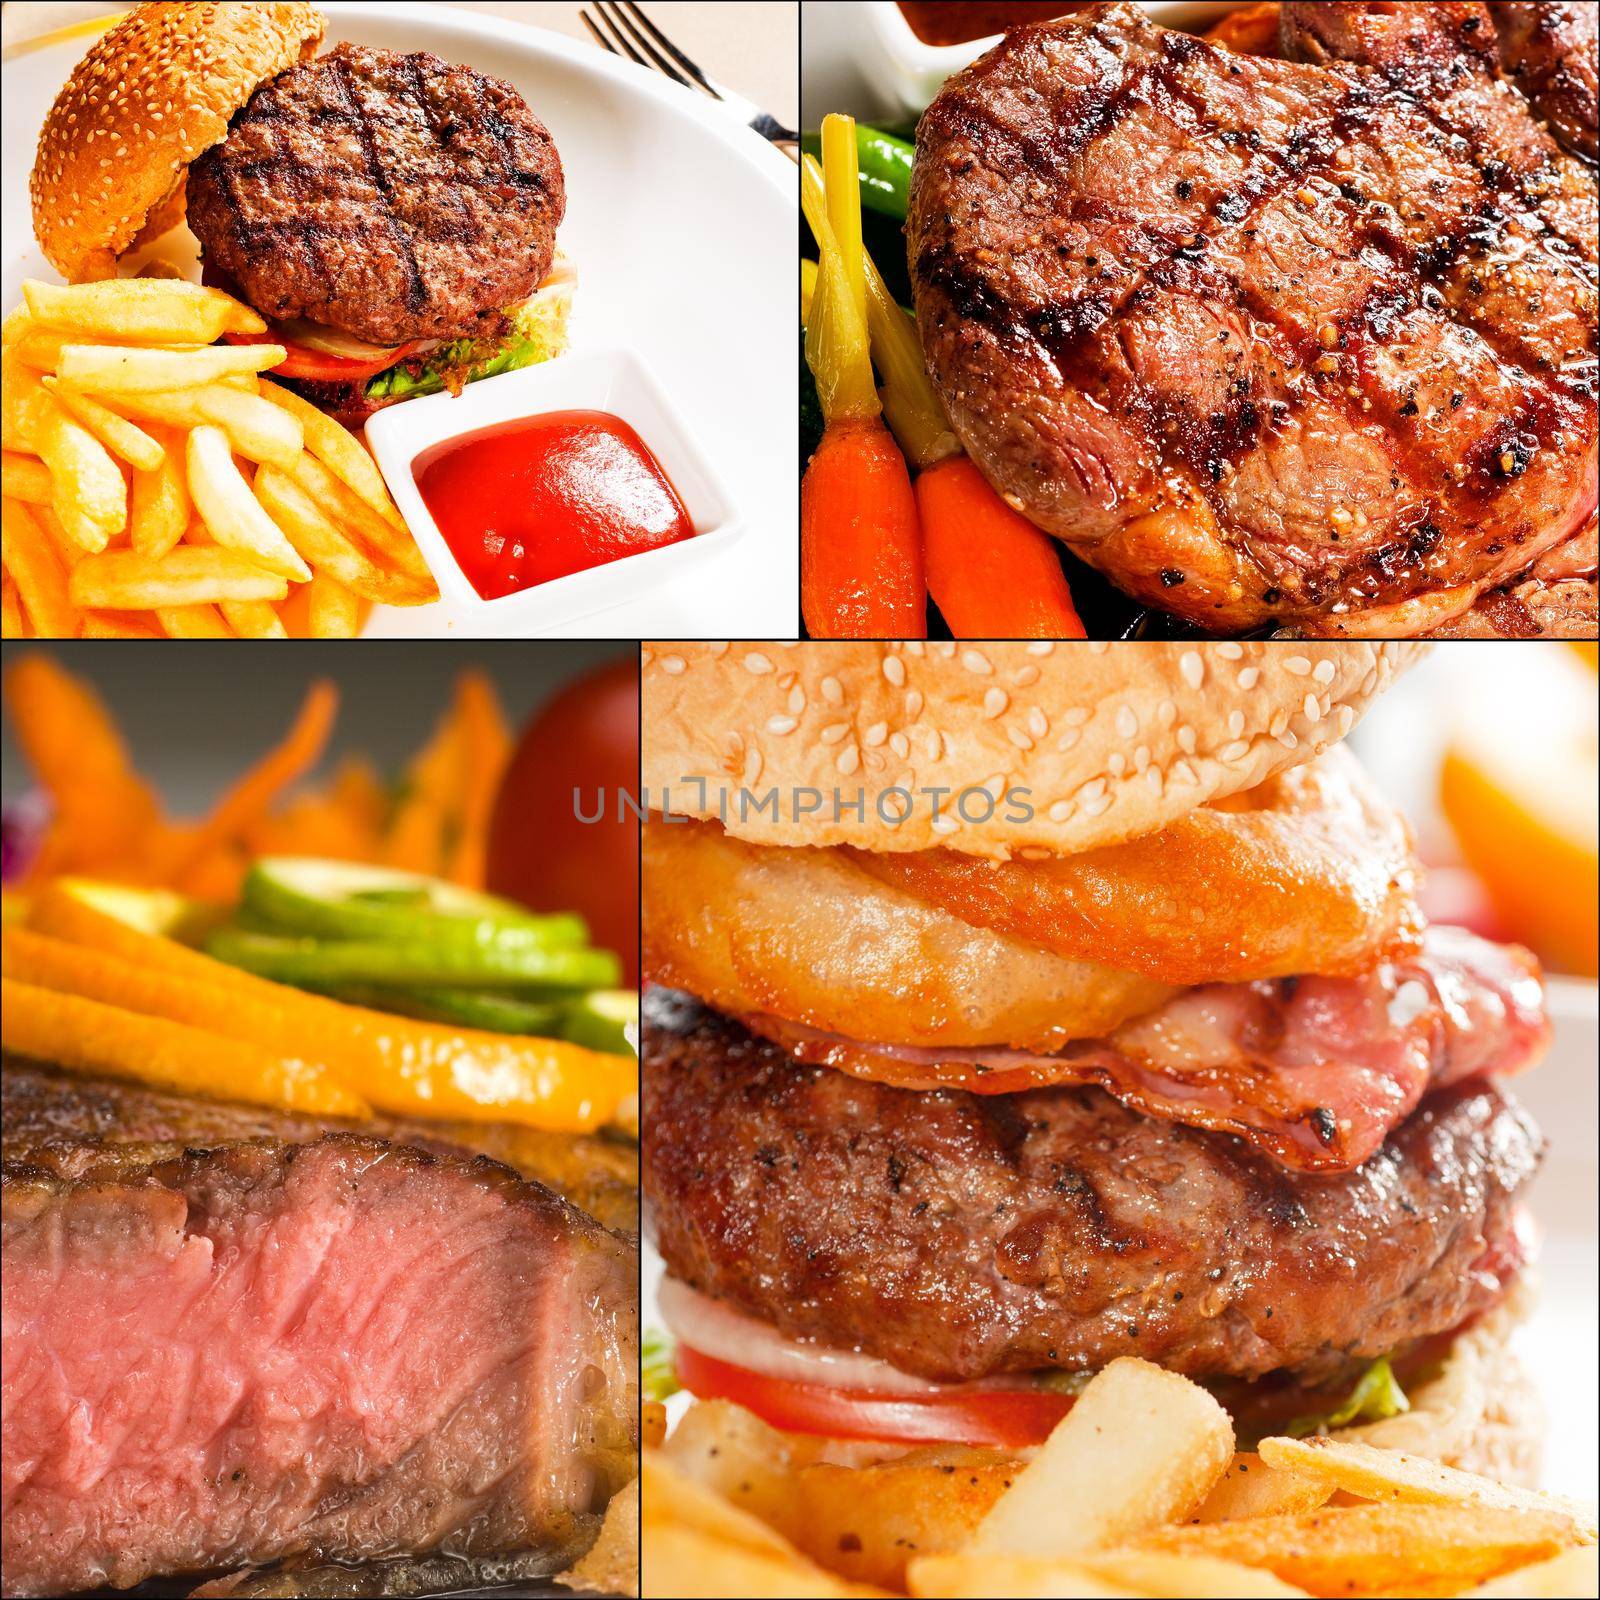 beef dishes collage by keko64